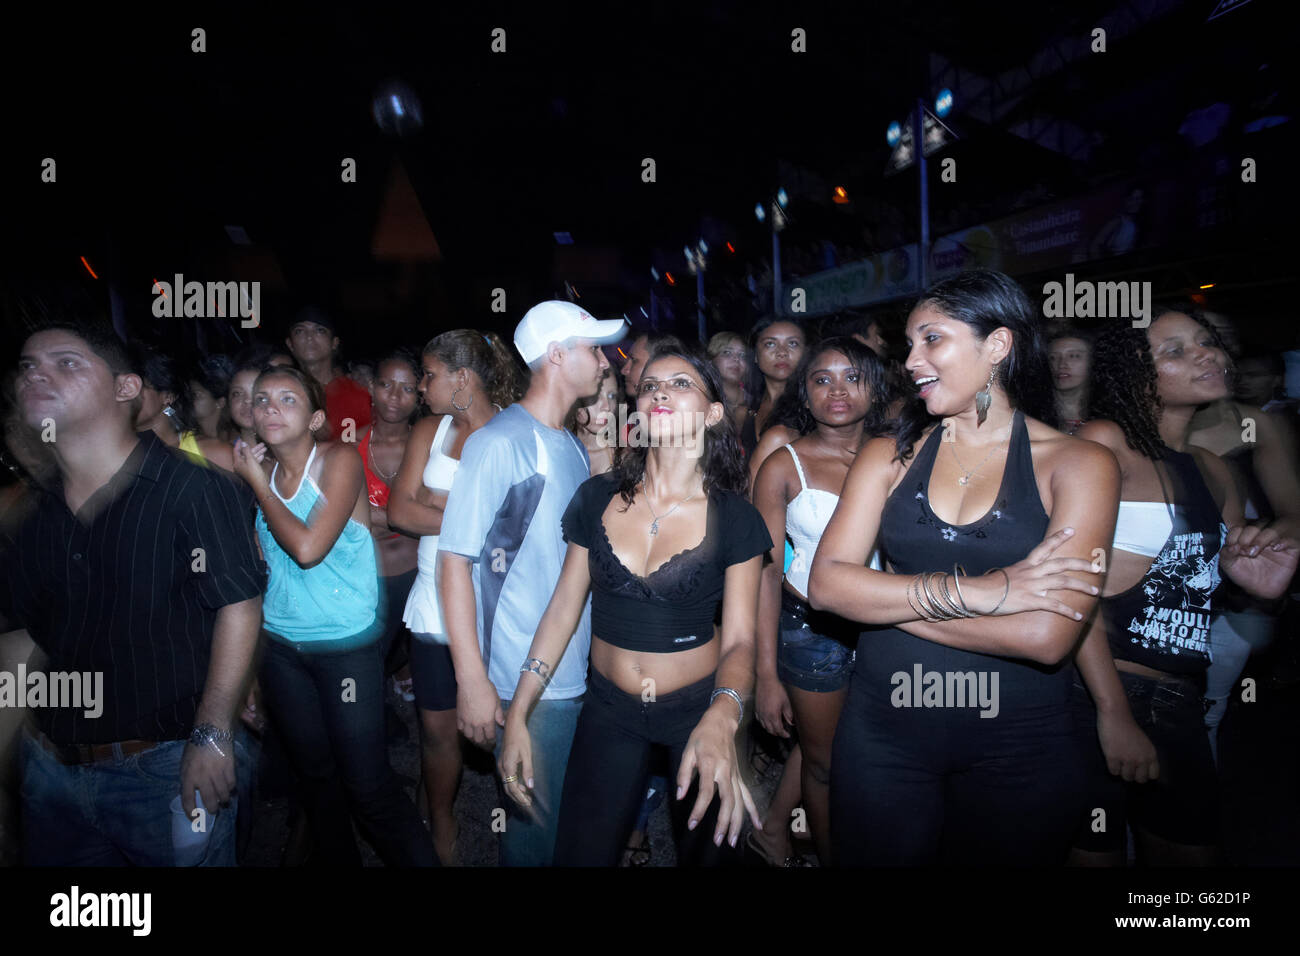 A wild rave or Aparelhagem party in a giant warehouse in Belem, Para, Brazil Stock Photo